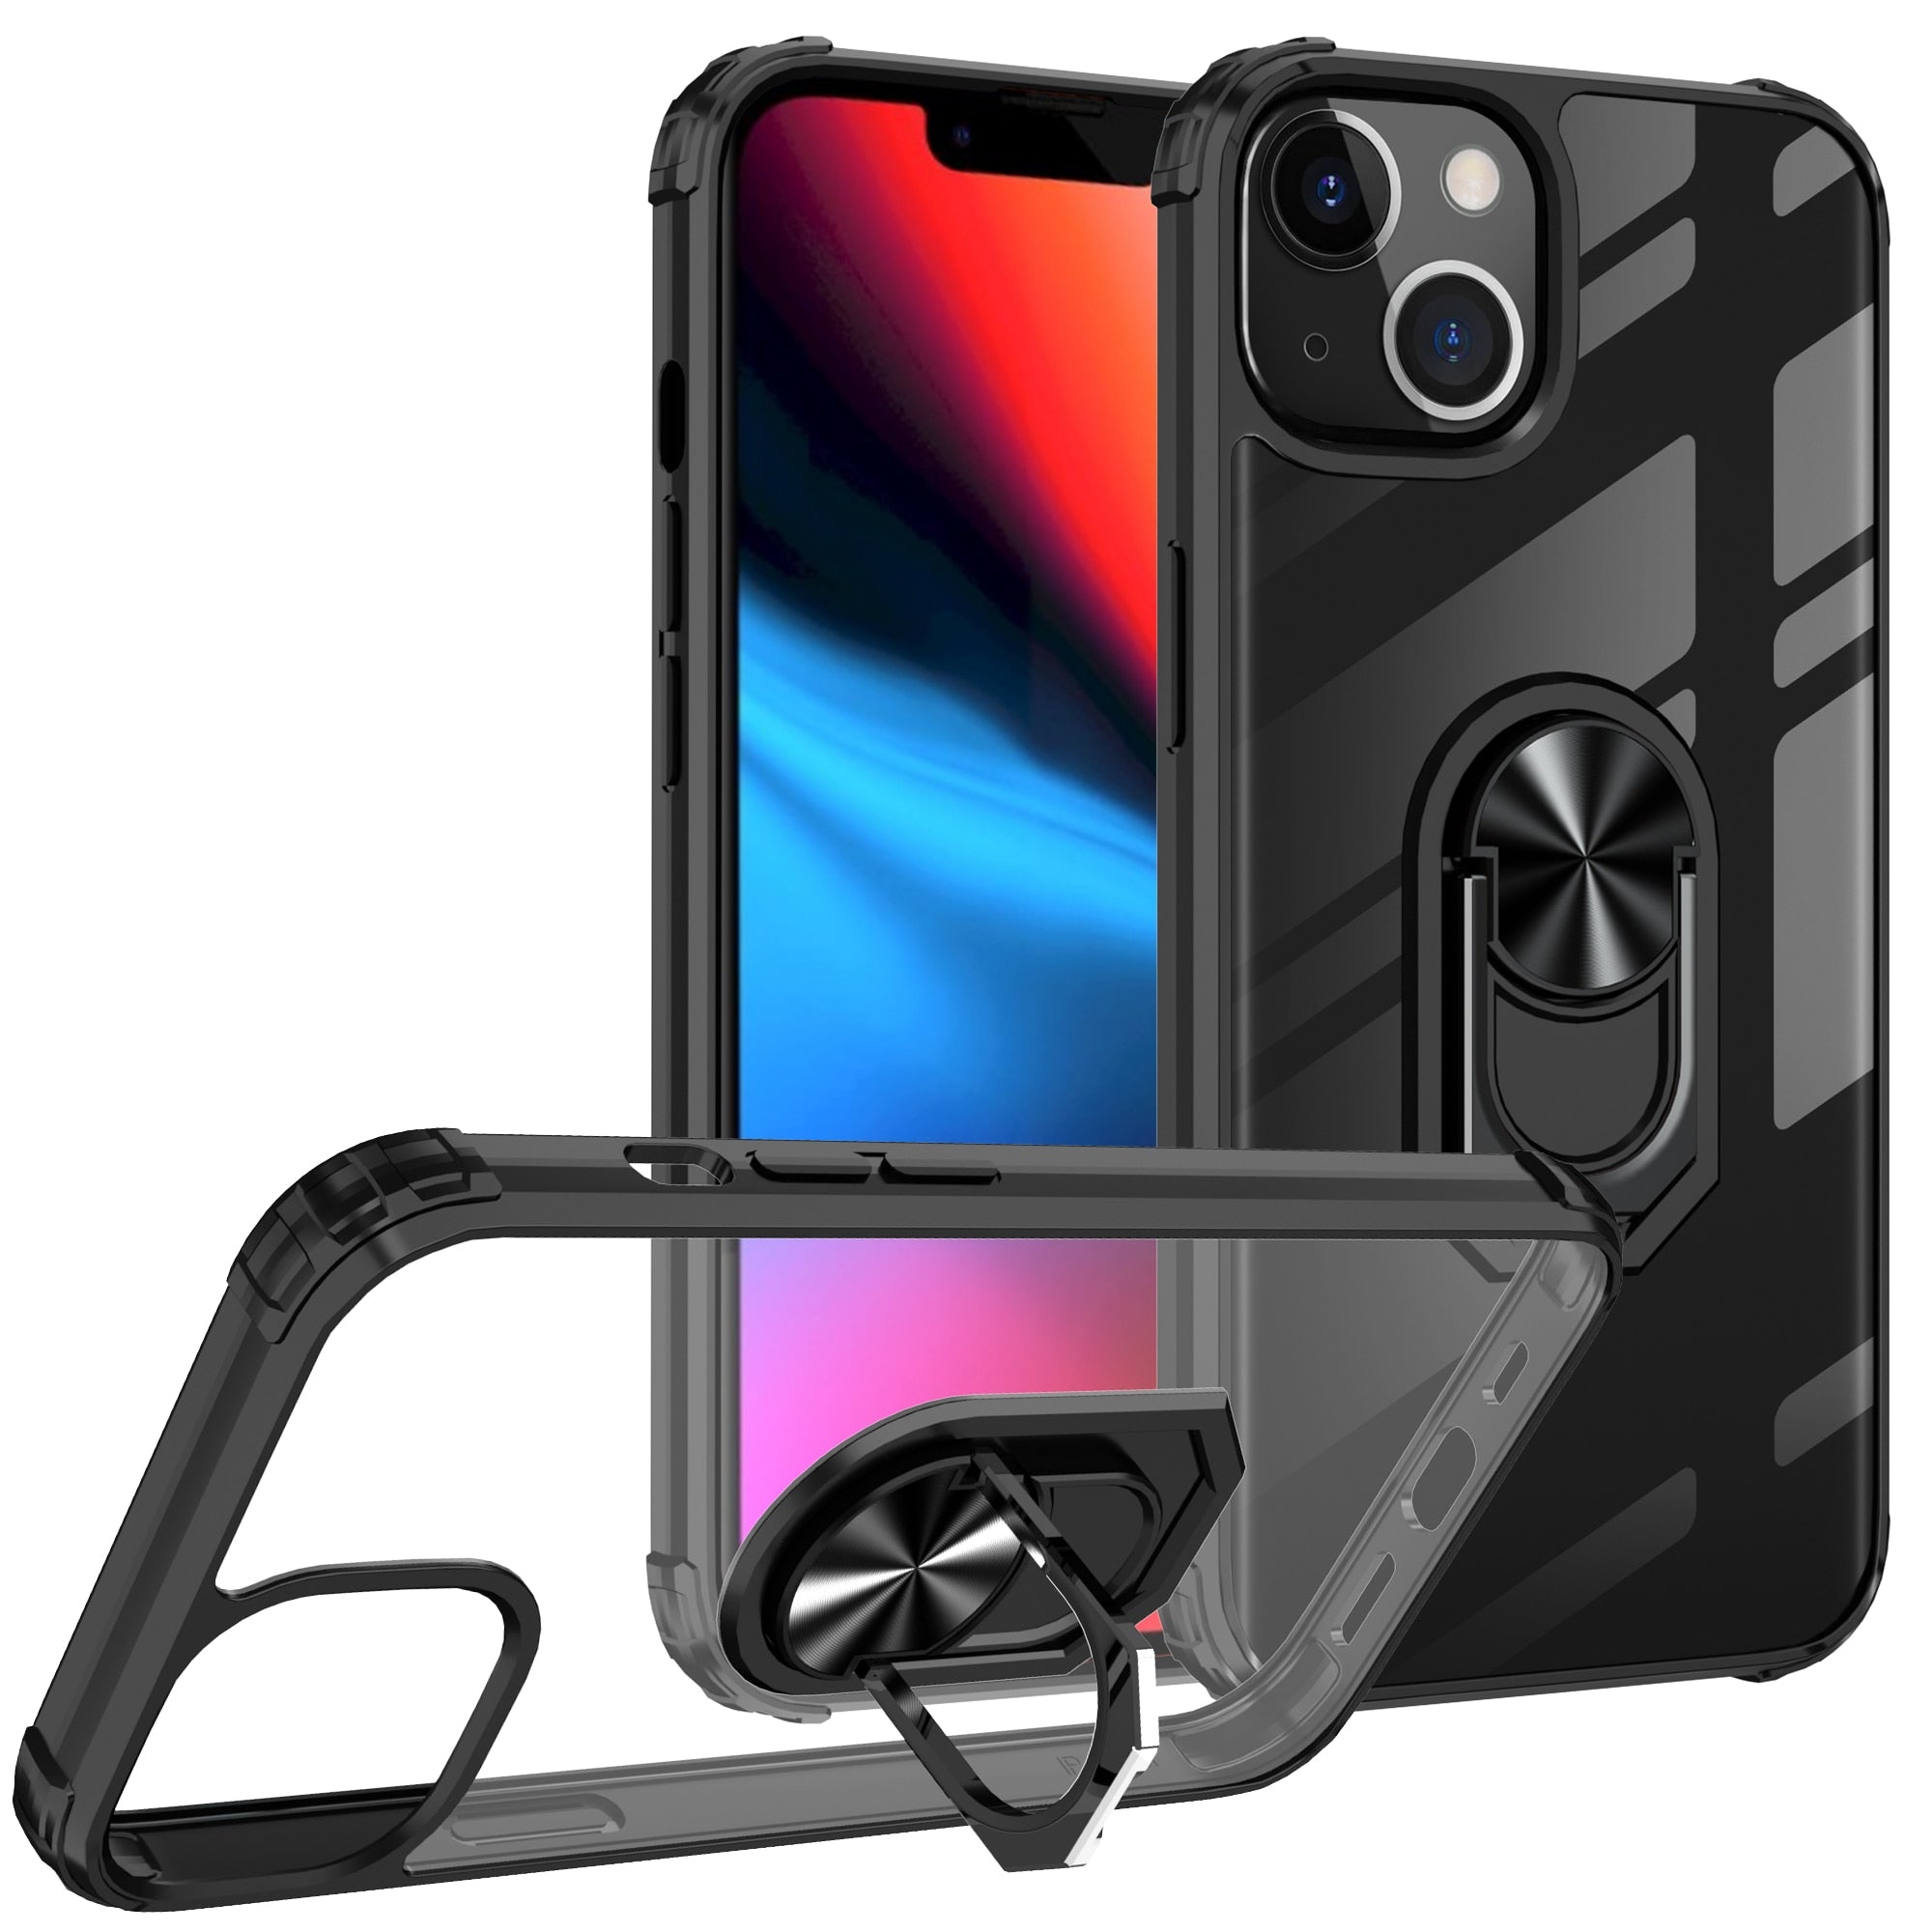 Crystal Clear for iPhone 13, iPhone 13 Pro Max Case Clear Soft Slim Fit Transparent Silicone Flexible Shockproof Bumper Cover - 380230 Find Epic Store